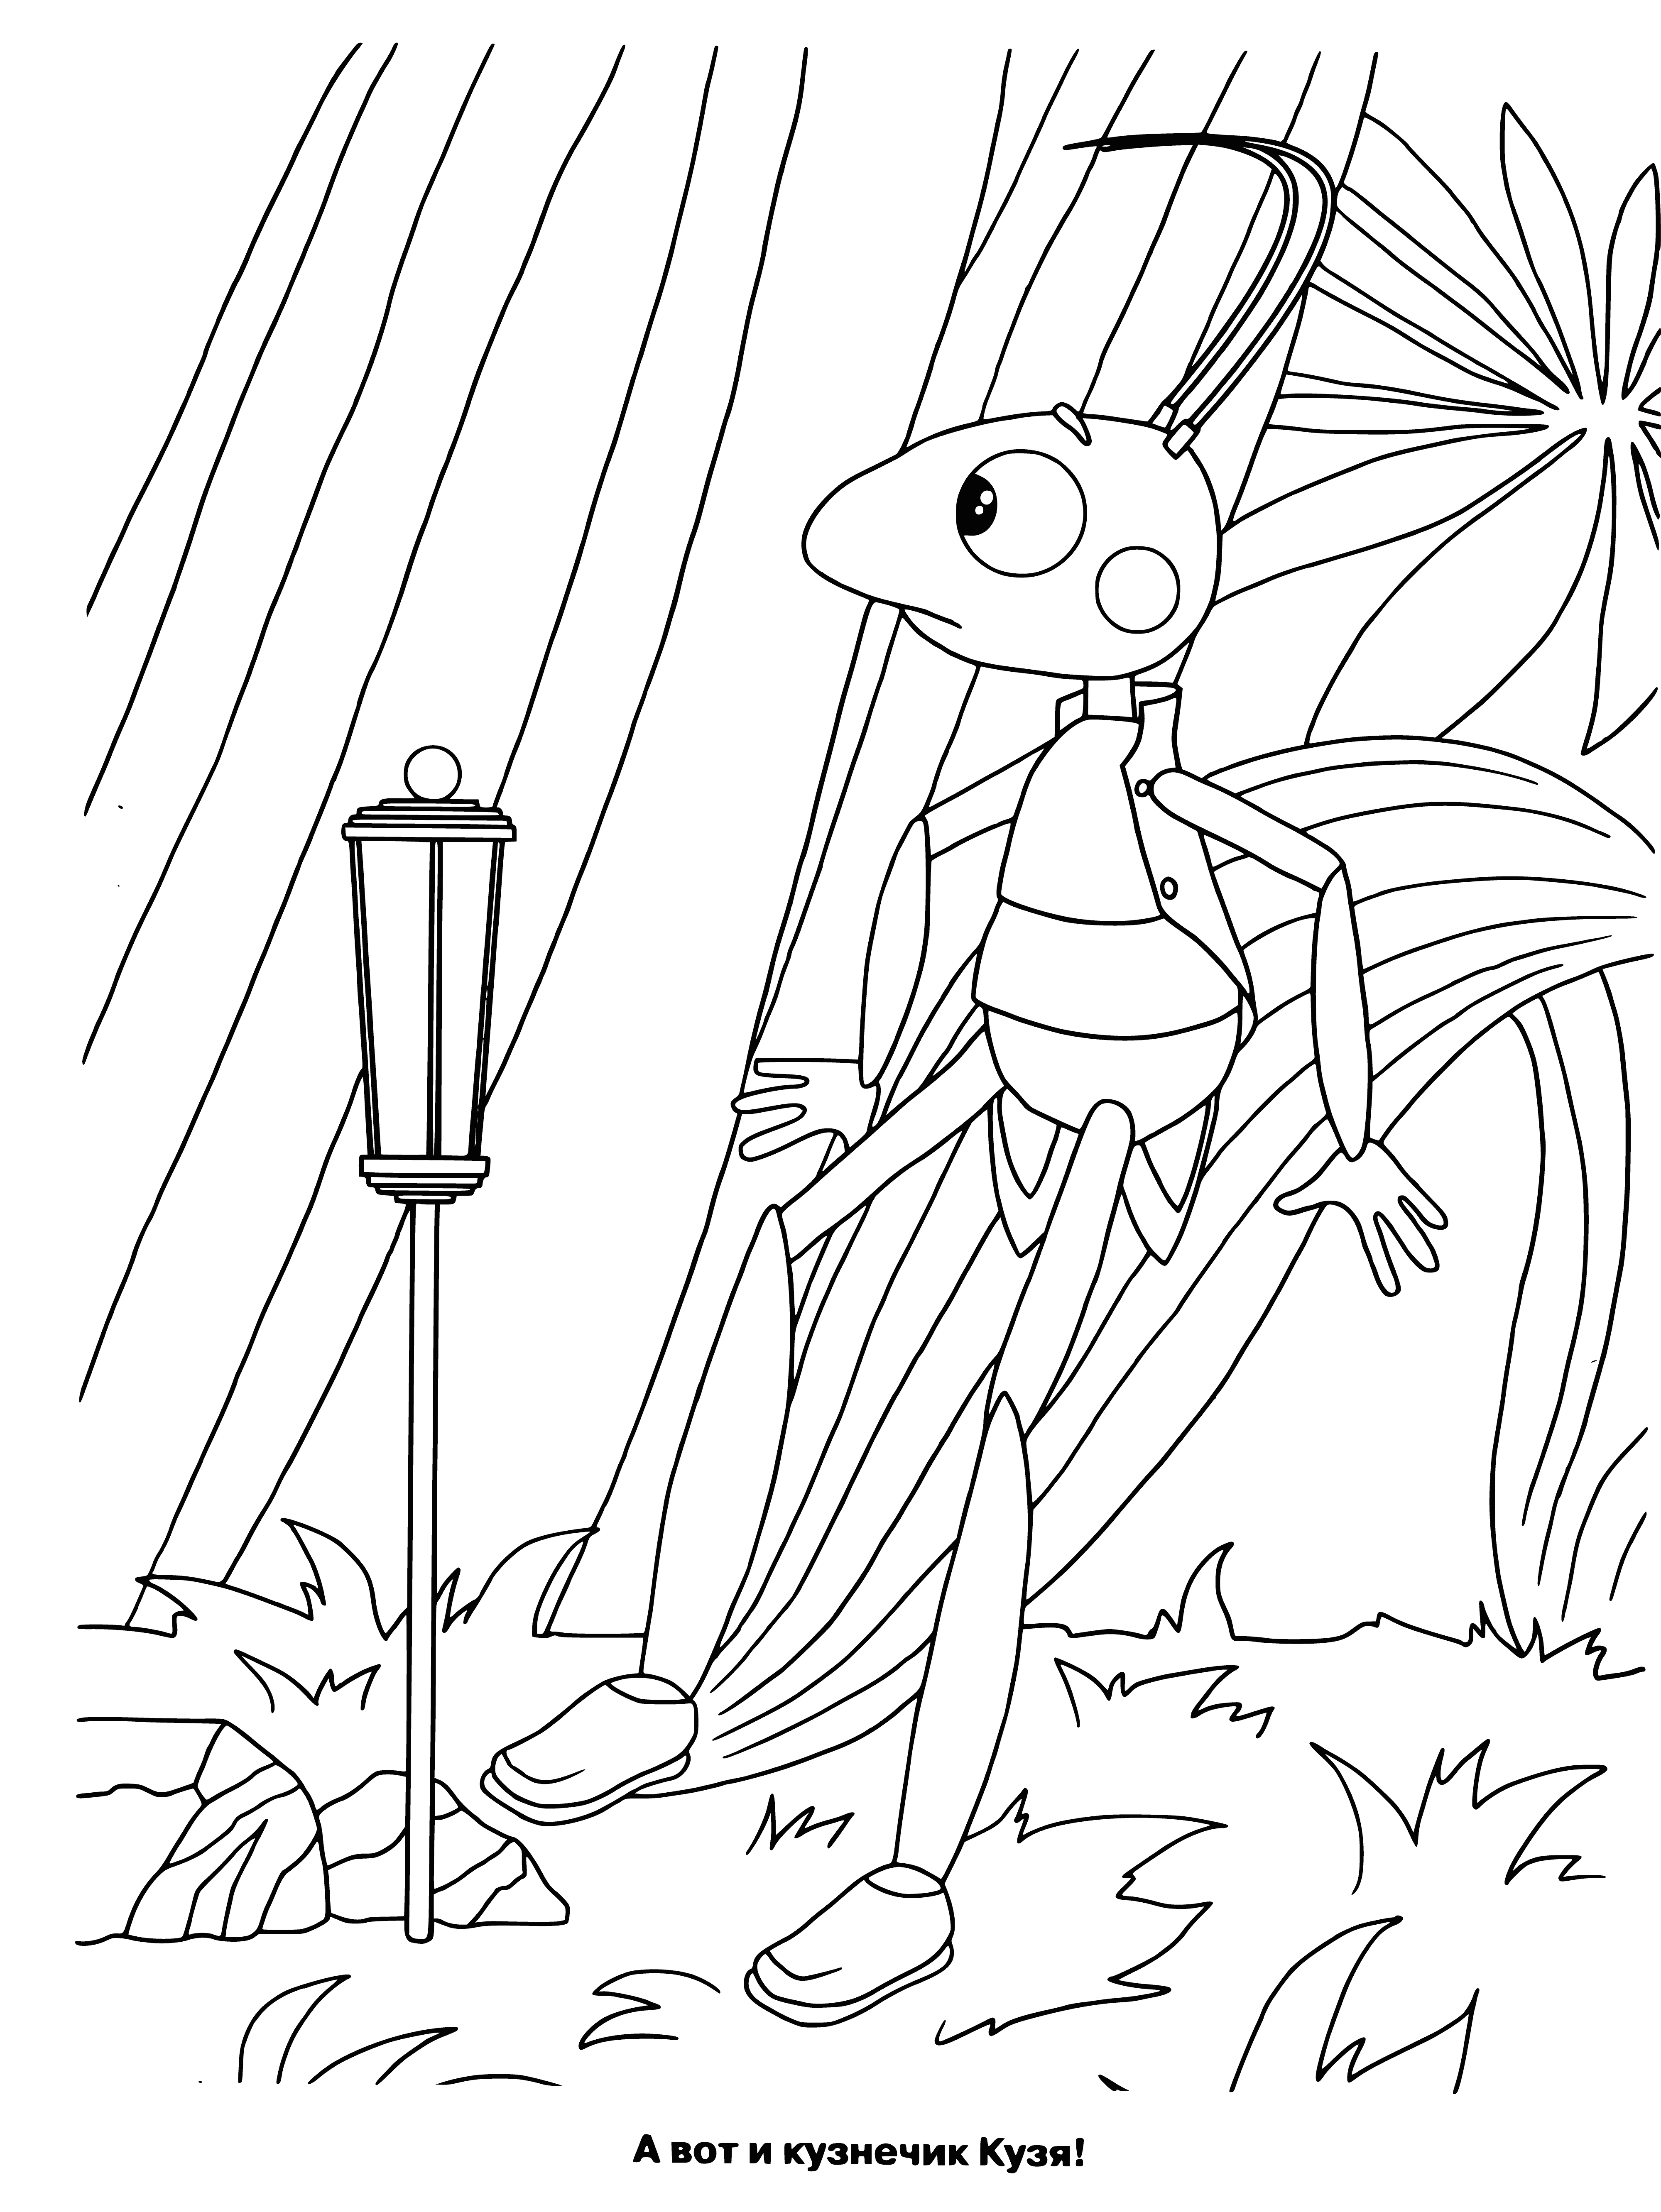 coloring page: Luntik and Kuzya, two cute, happy characters: one a six-legged green creature, the other a grasshopper holding a flower.